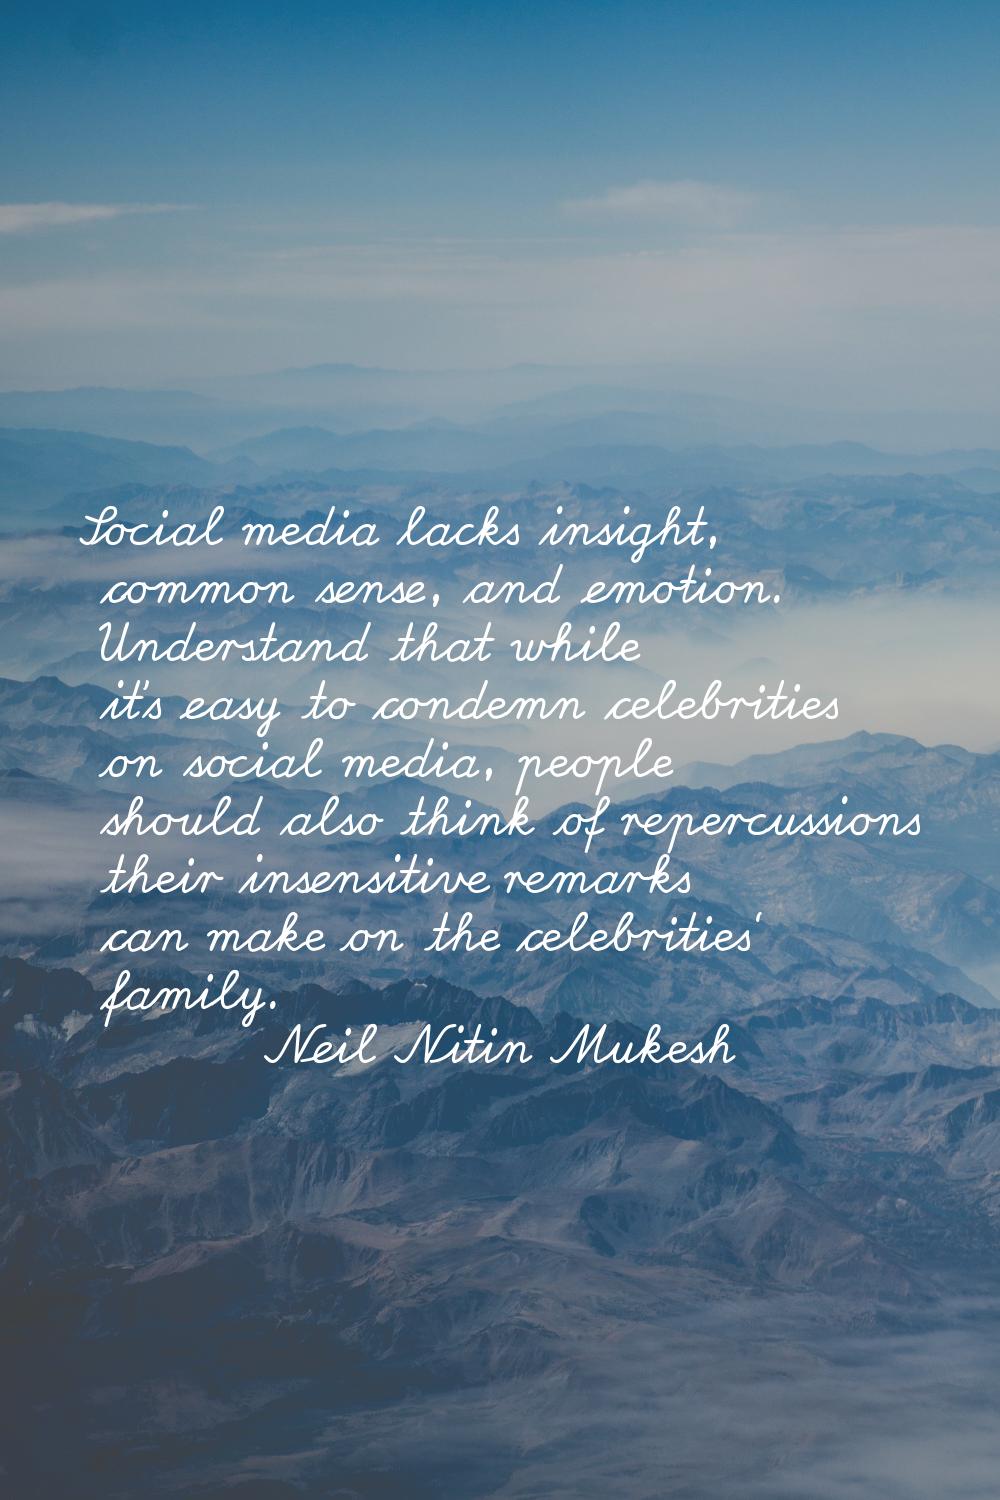 Social media lacks insight, common sense, and emotion. Understand that while it's easy to condemn c